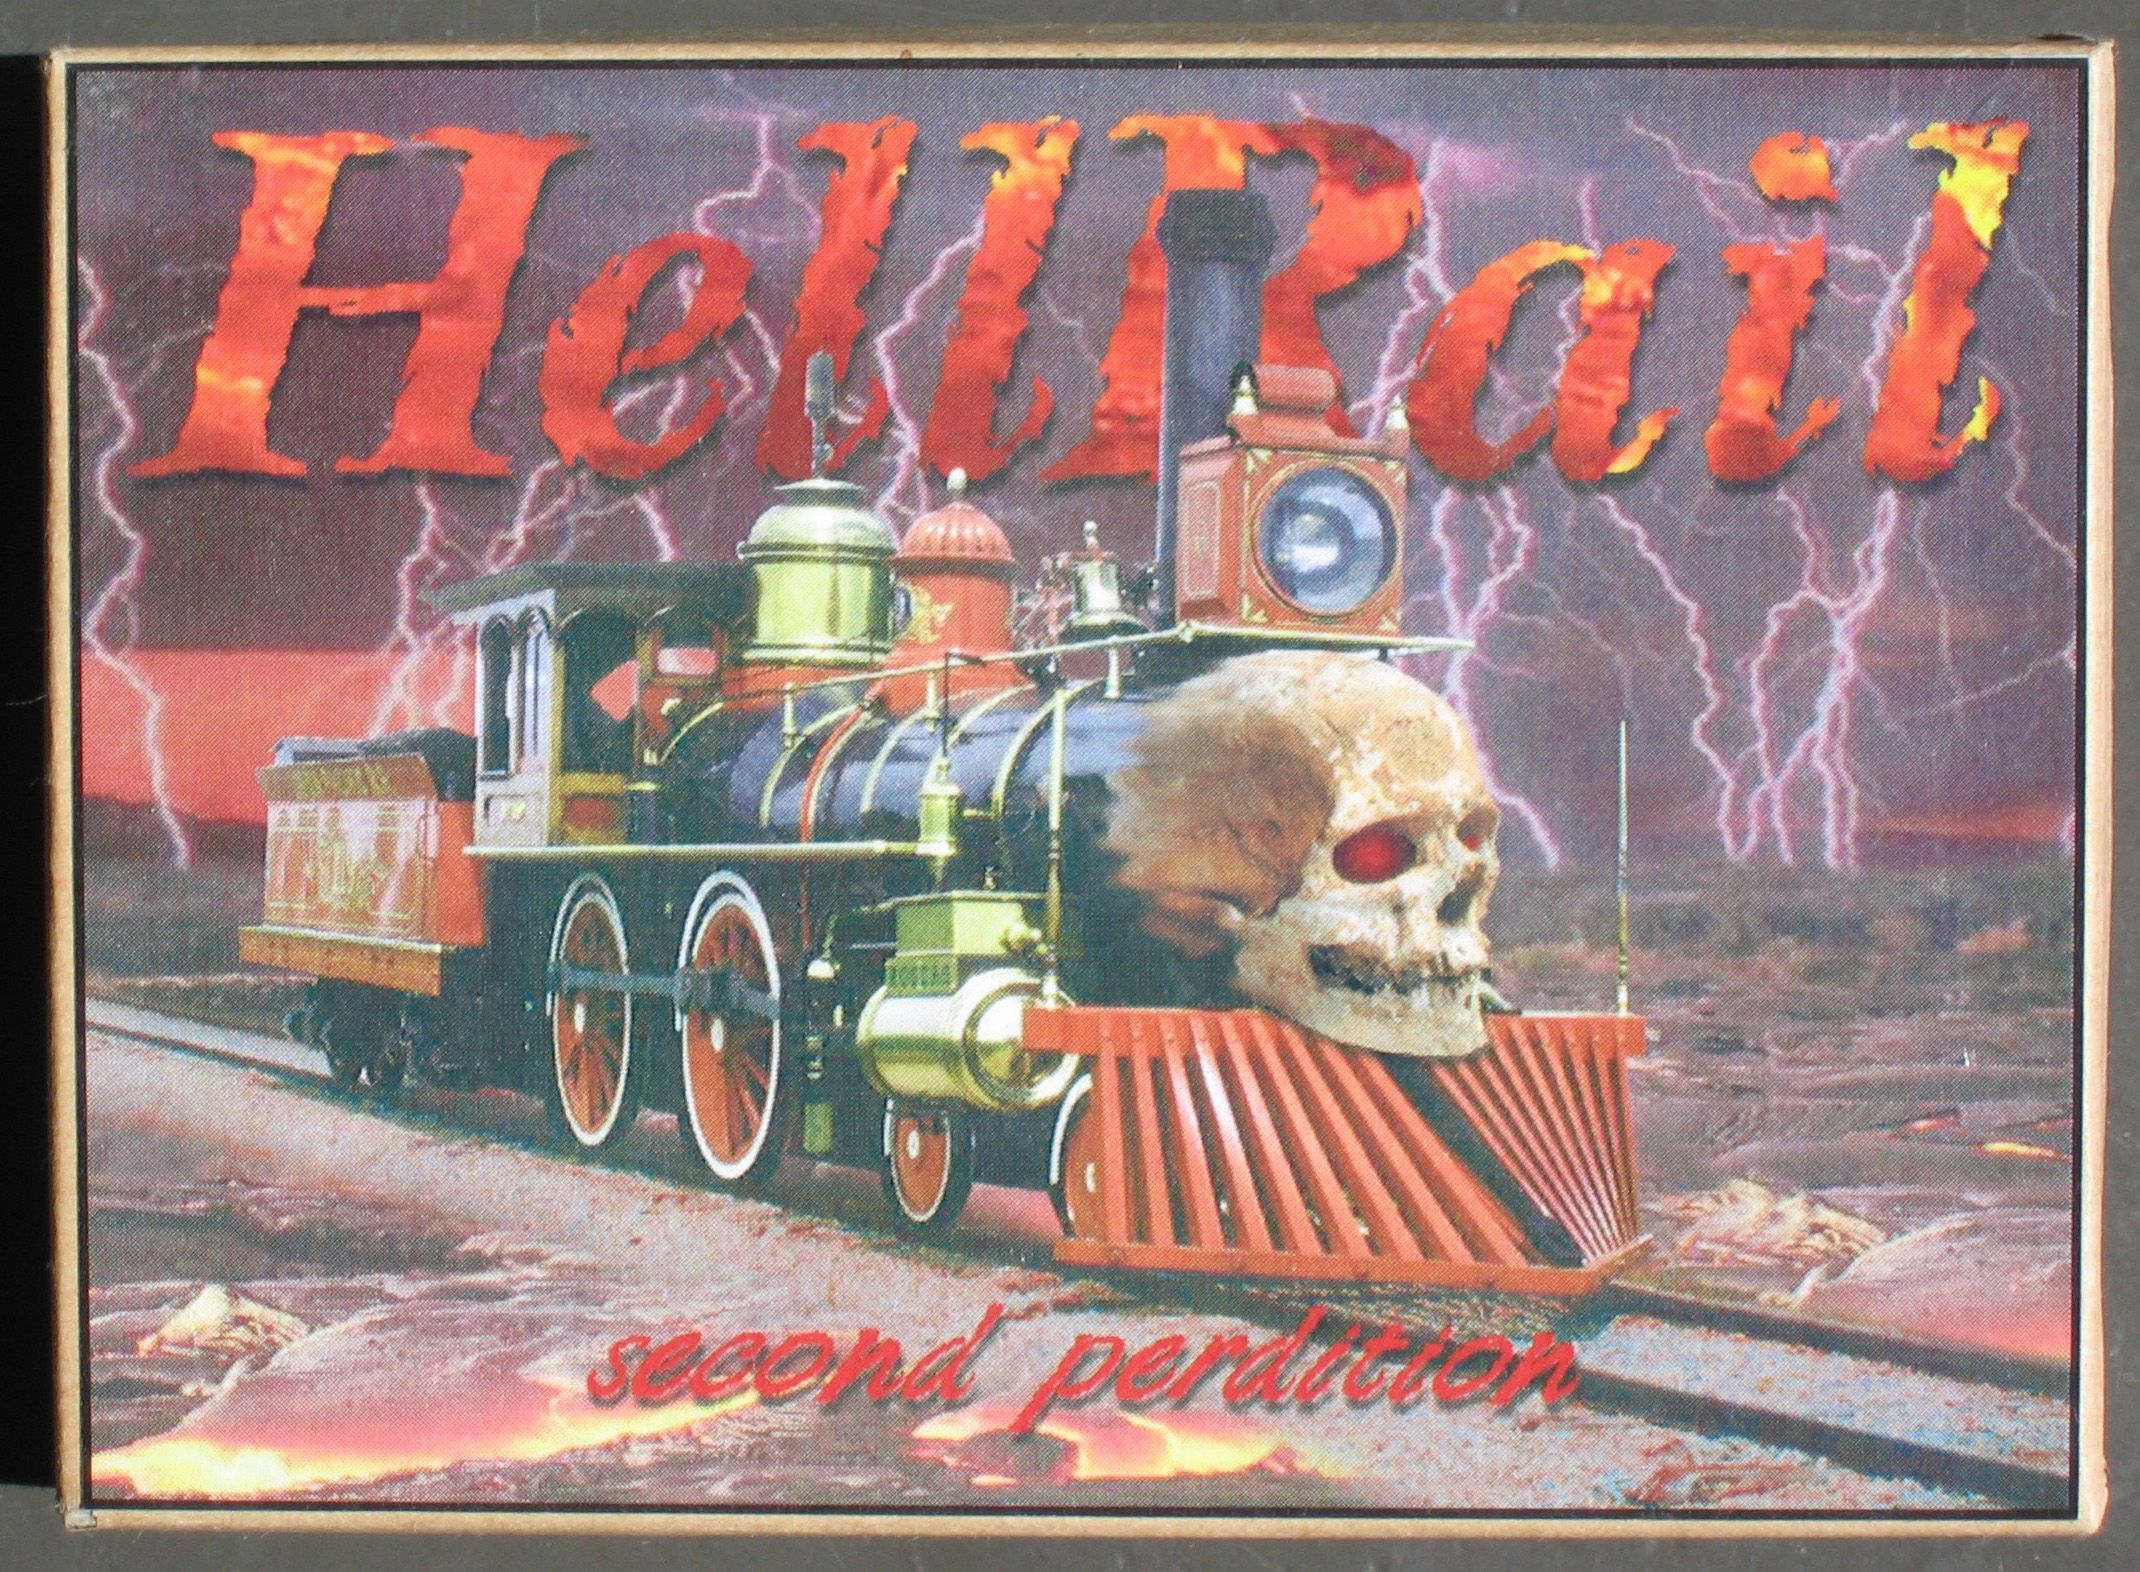 HellRail: Second Perdition